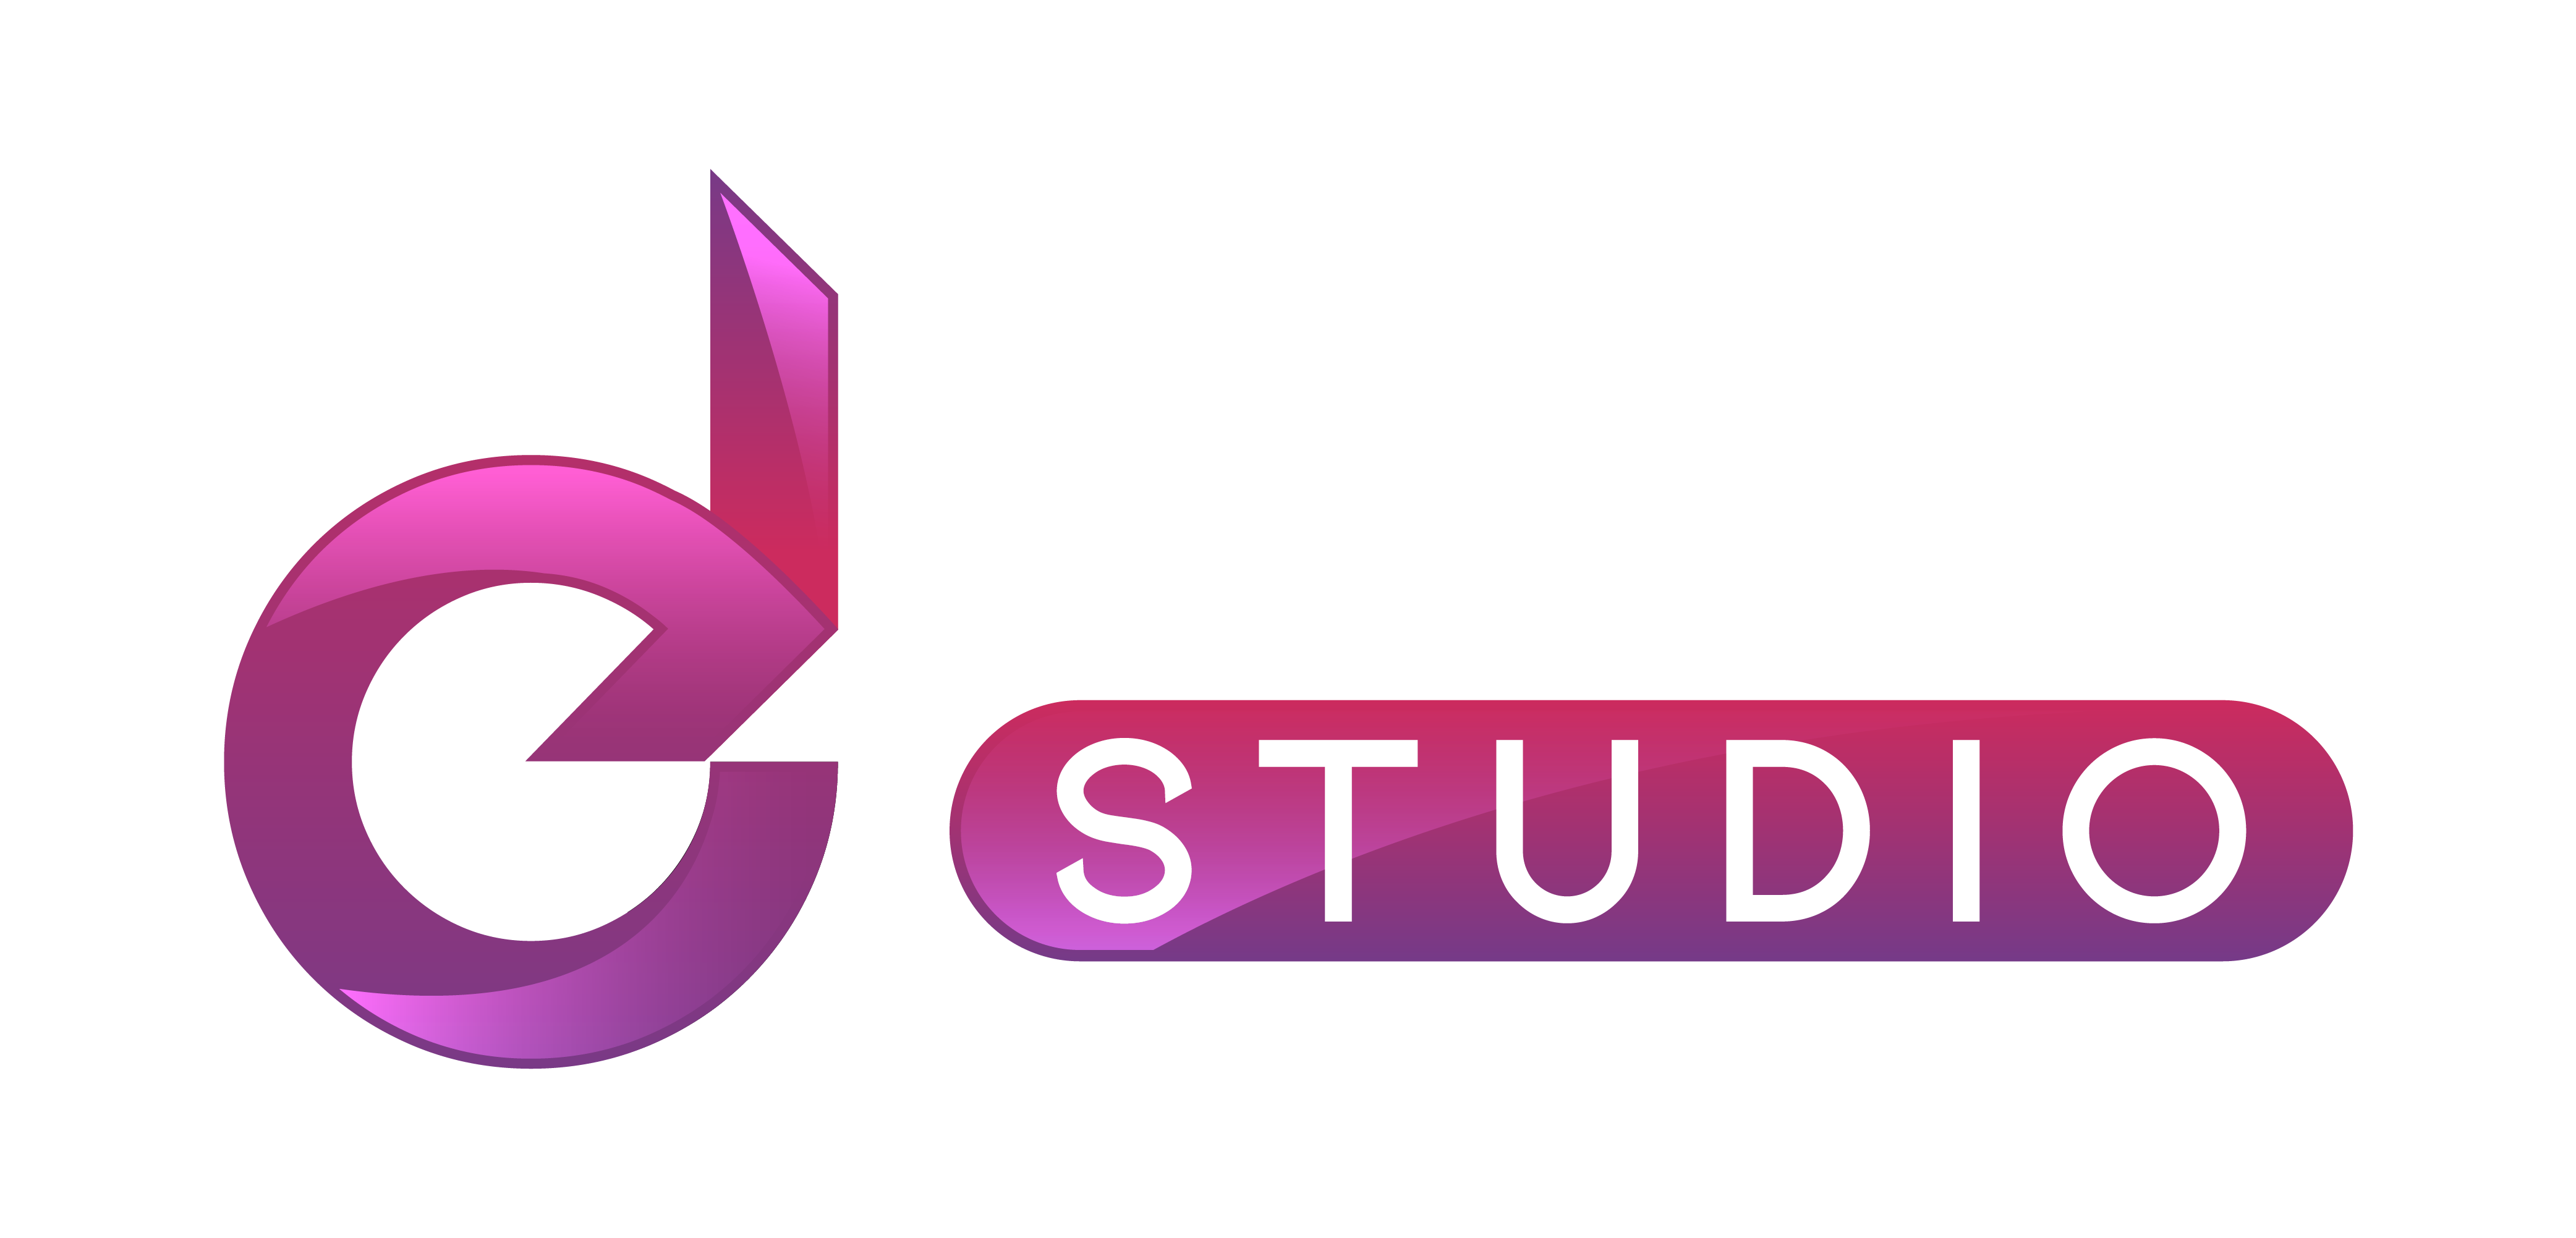 Feedback of my spin-off of the new Studio logo - Creations Feedback -  Developer Forum | Roblox